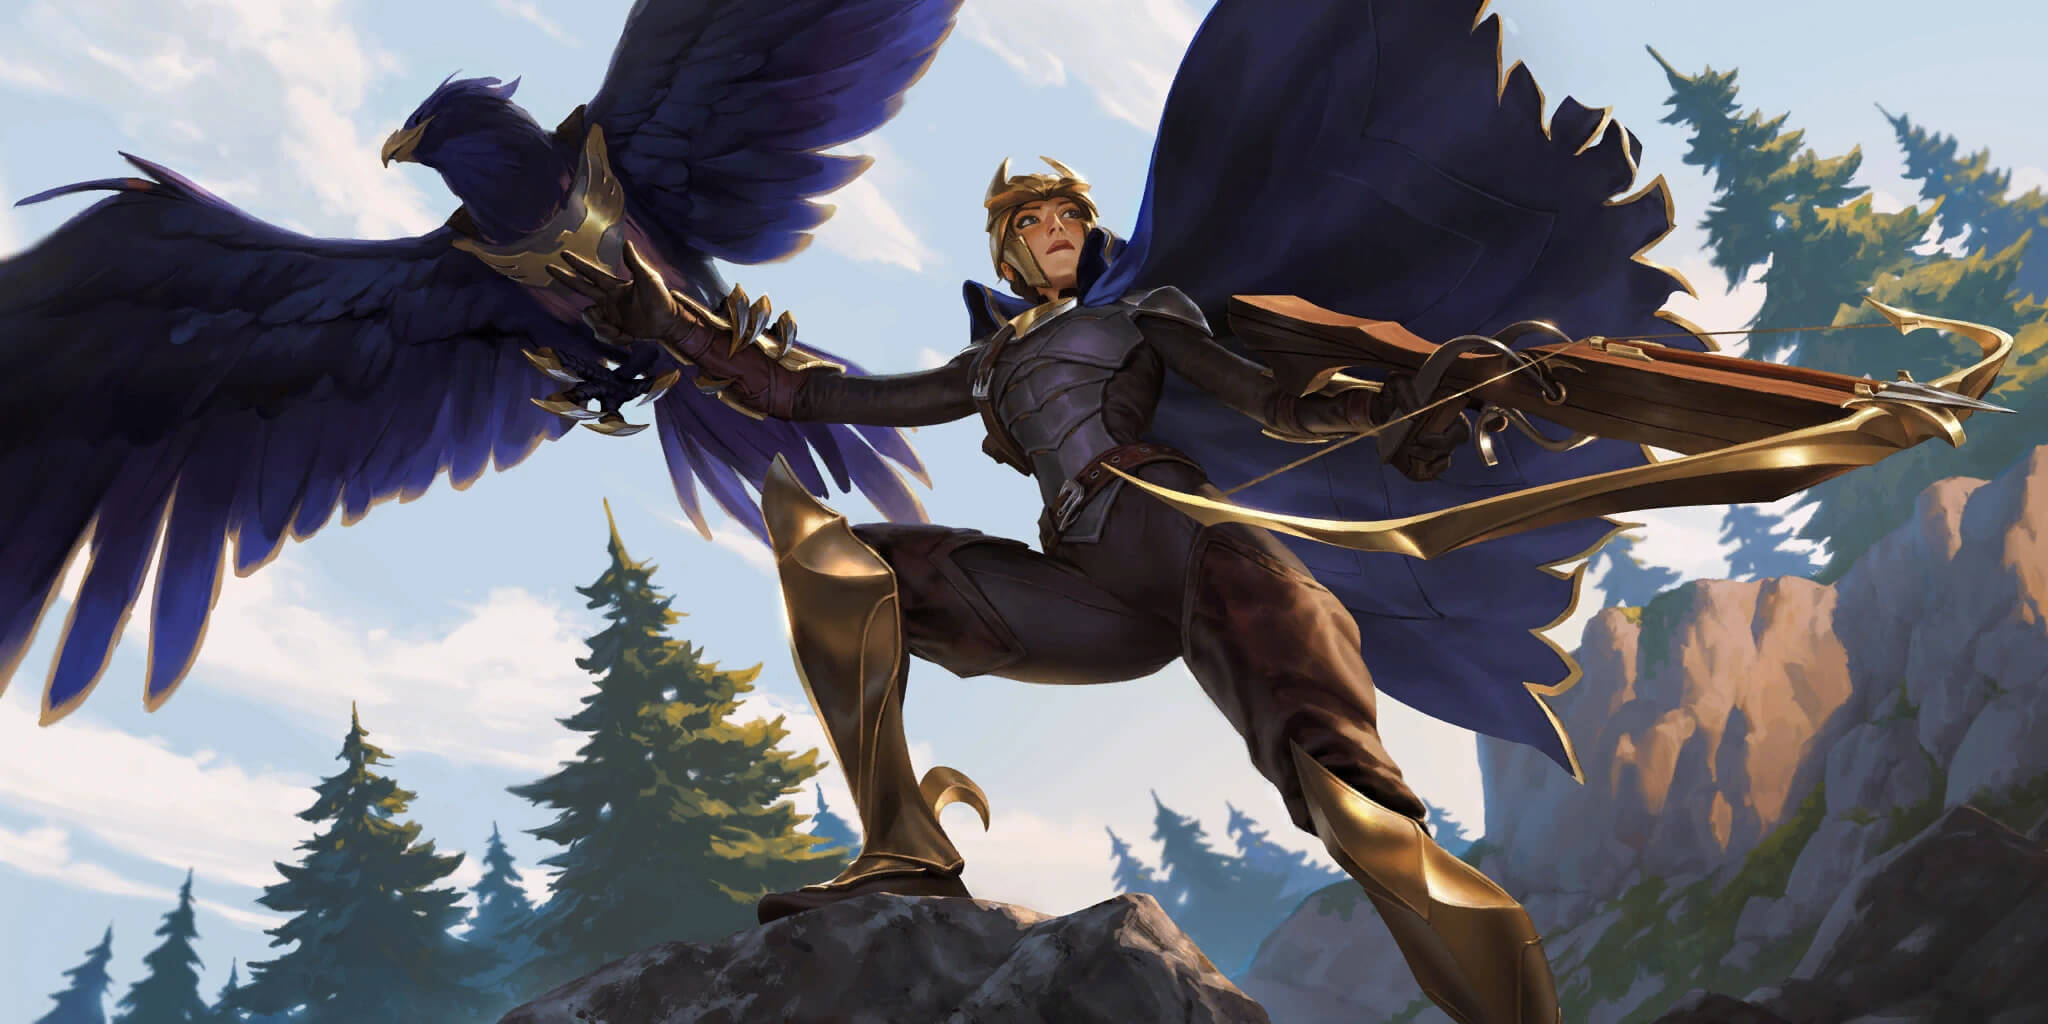 Quinn the ranger-knight from Demacia with her azurite eagle companion, Valor